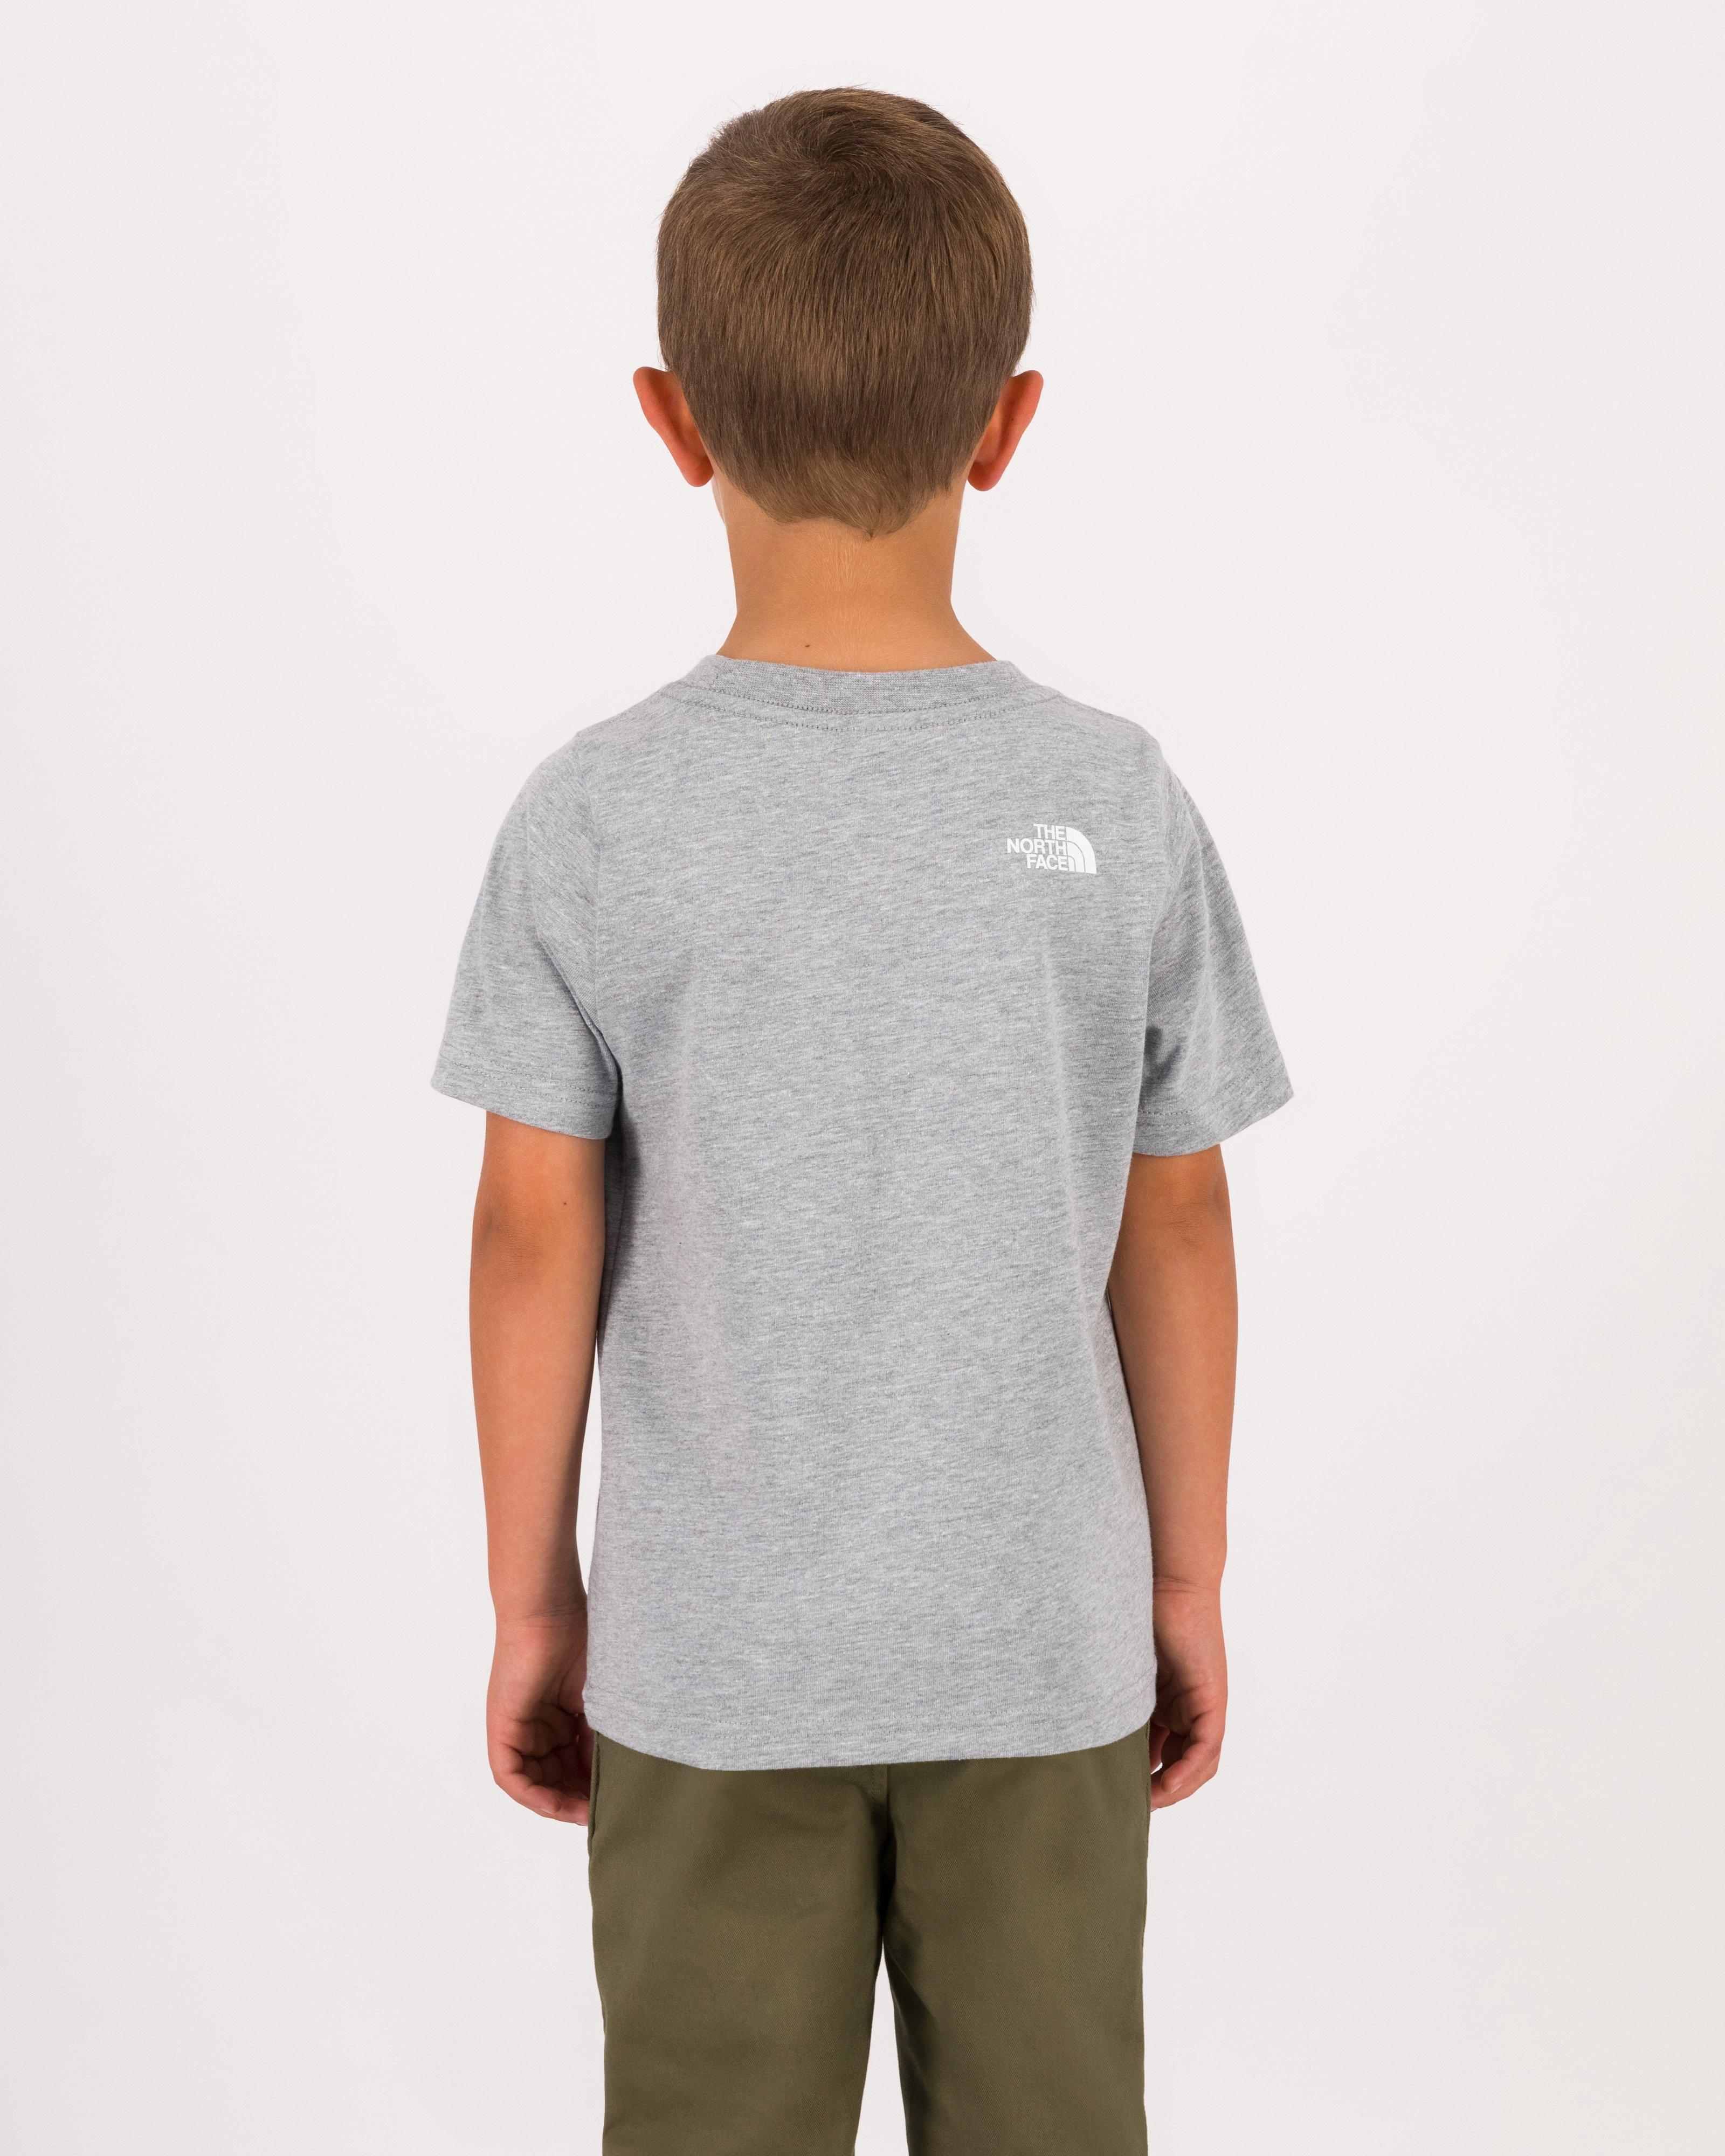 The North Face Boys’ Graphic T-shirt -  Grey